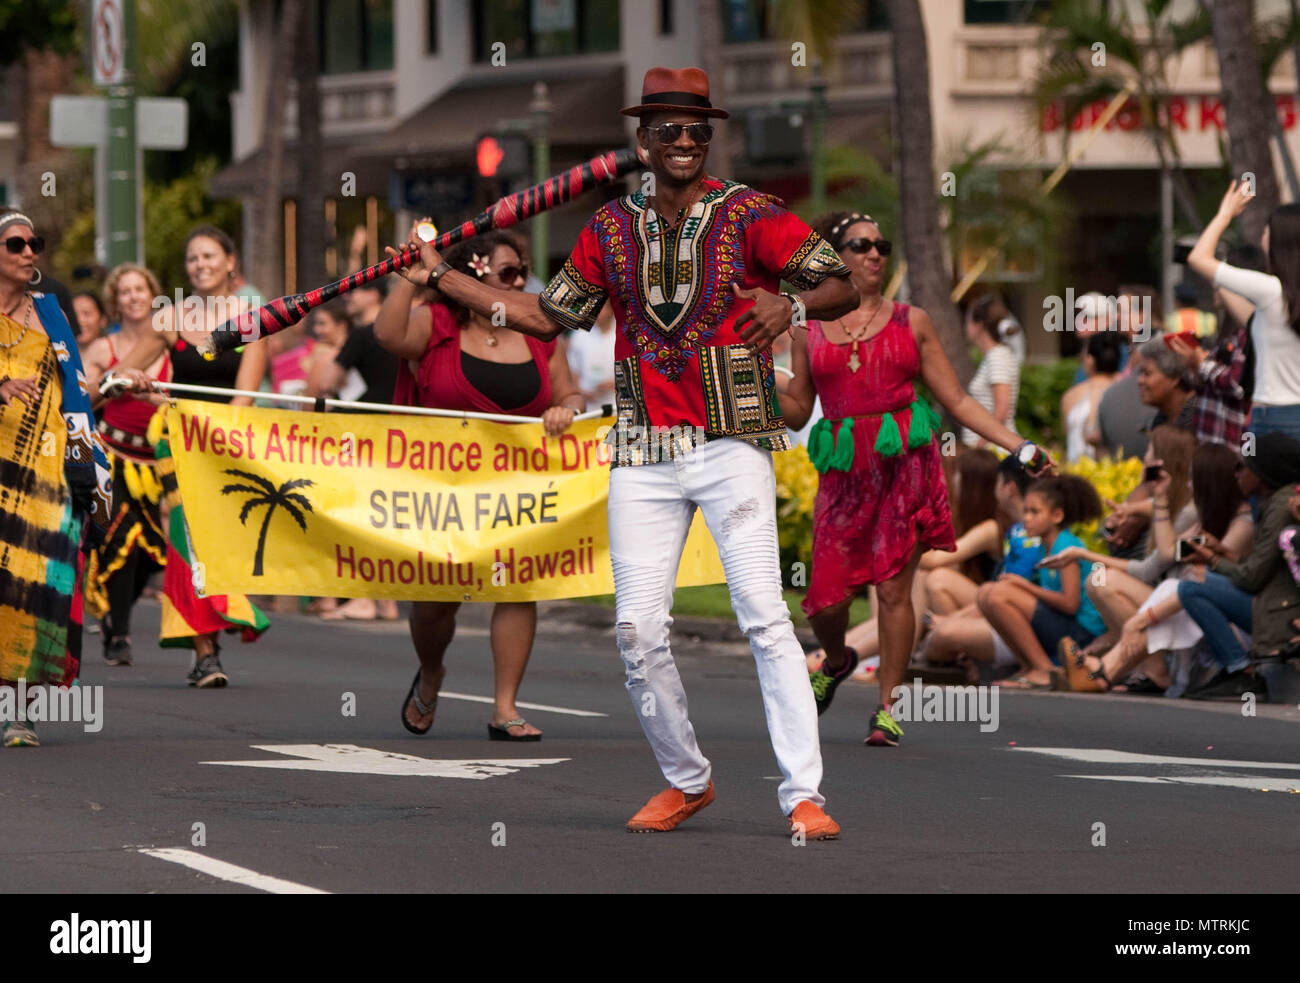 HONOLULU — Telepharoah Brandon, a member of Sewa Faré, a West African Dance and Drum group, marches in the Martin Luther King Jr. Holiday Parade in Waikiki, Jan. 16, 2017. Brandon holds a Samoan fireknife practice staff and wears a dashiki to represent African, American and Polynesian unity. The parade, which ran from Magic Island at Ala Moana Beach Park to Kapiolani Park, included a unity rally. Attendees at the rally partook in food and entertainment at Kapiolani Park. (U.S. Army photo by Kristen Wong)   Stock Photo